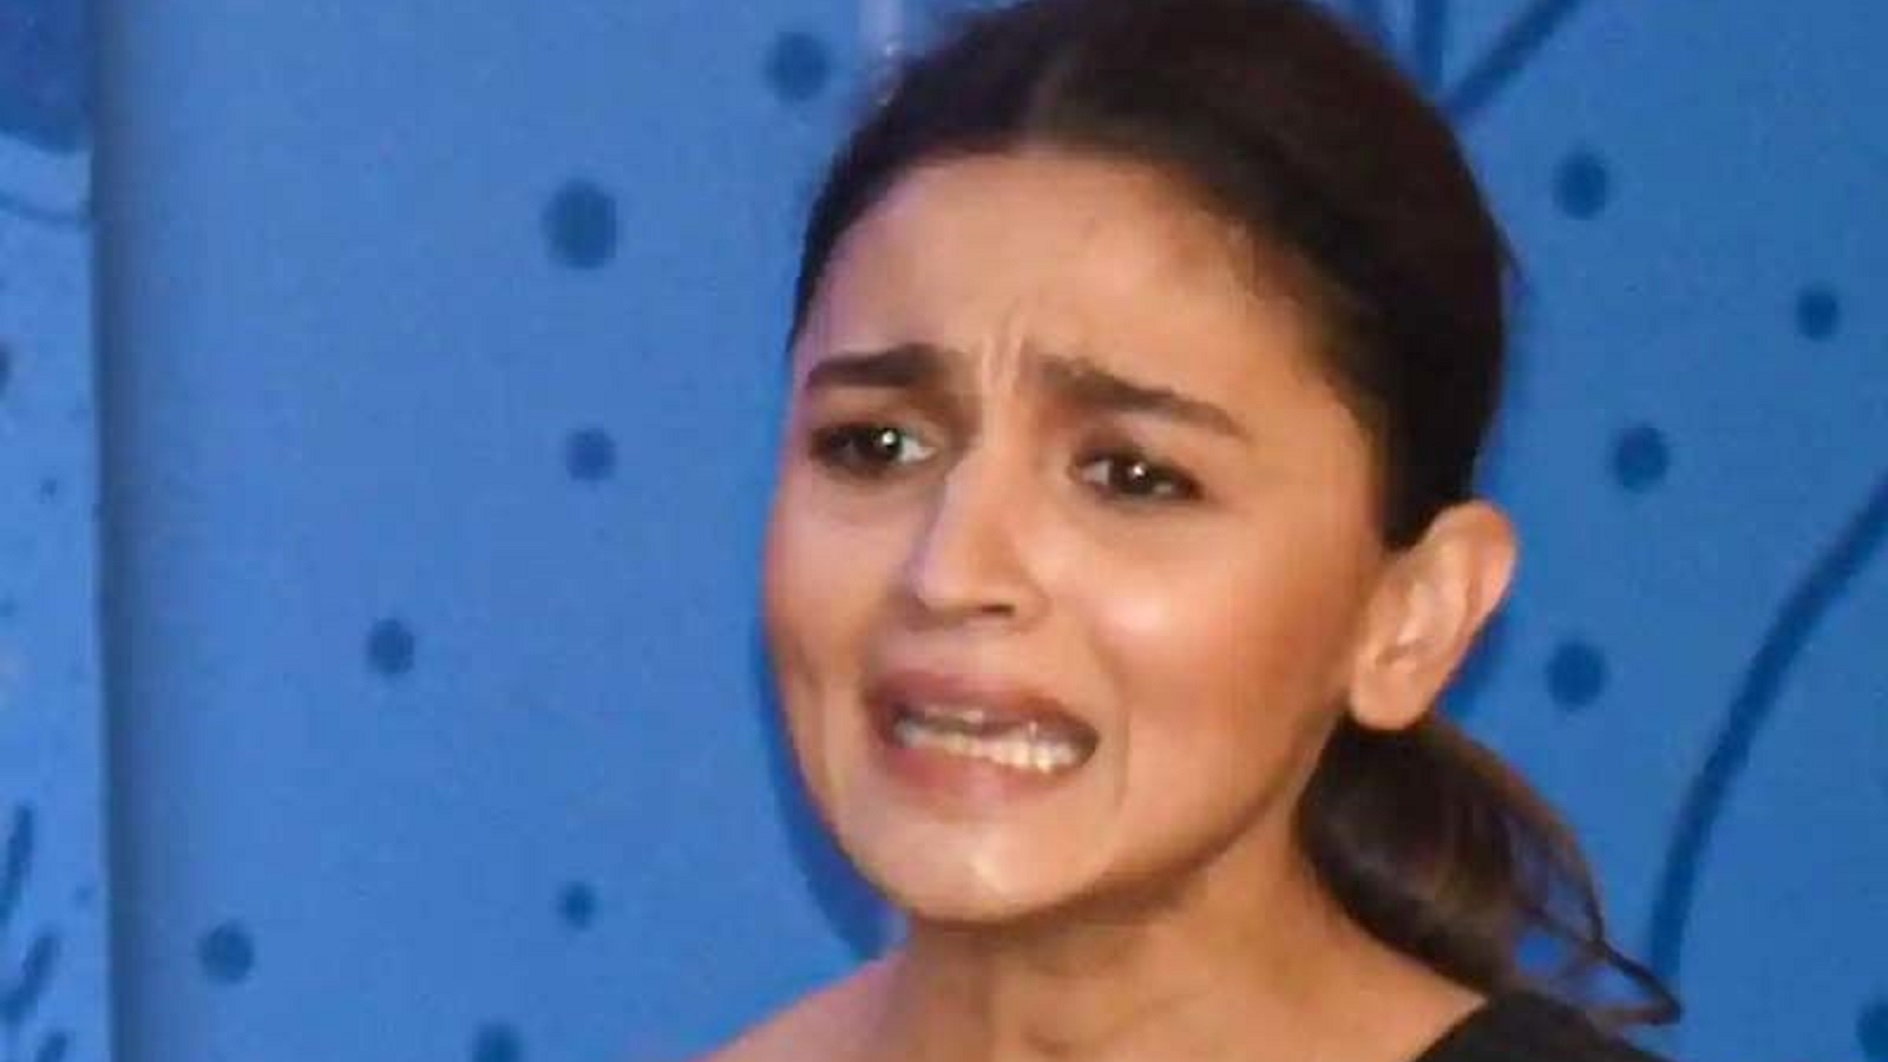 Alia Bhatt Finally Acknowledges Her Advantage As An Industry Kid: “It’s Possibly Been Easier For Me”